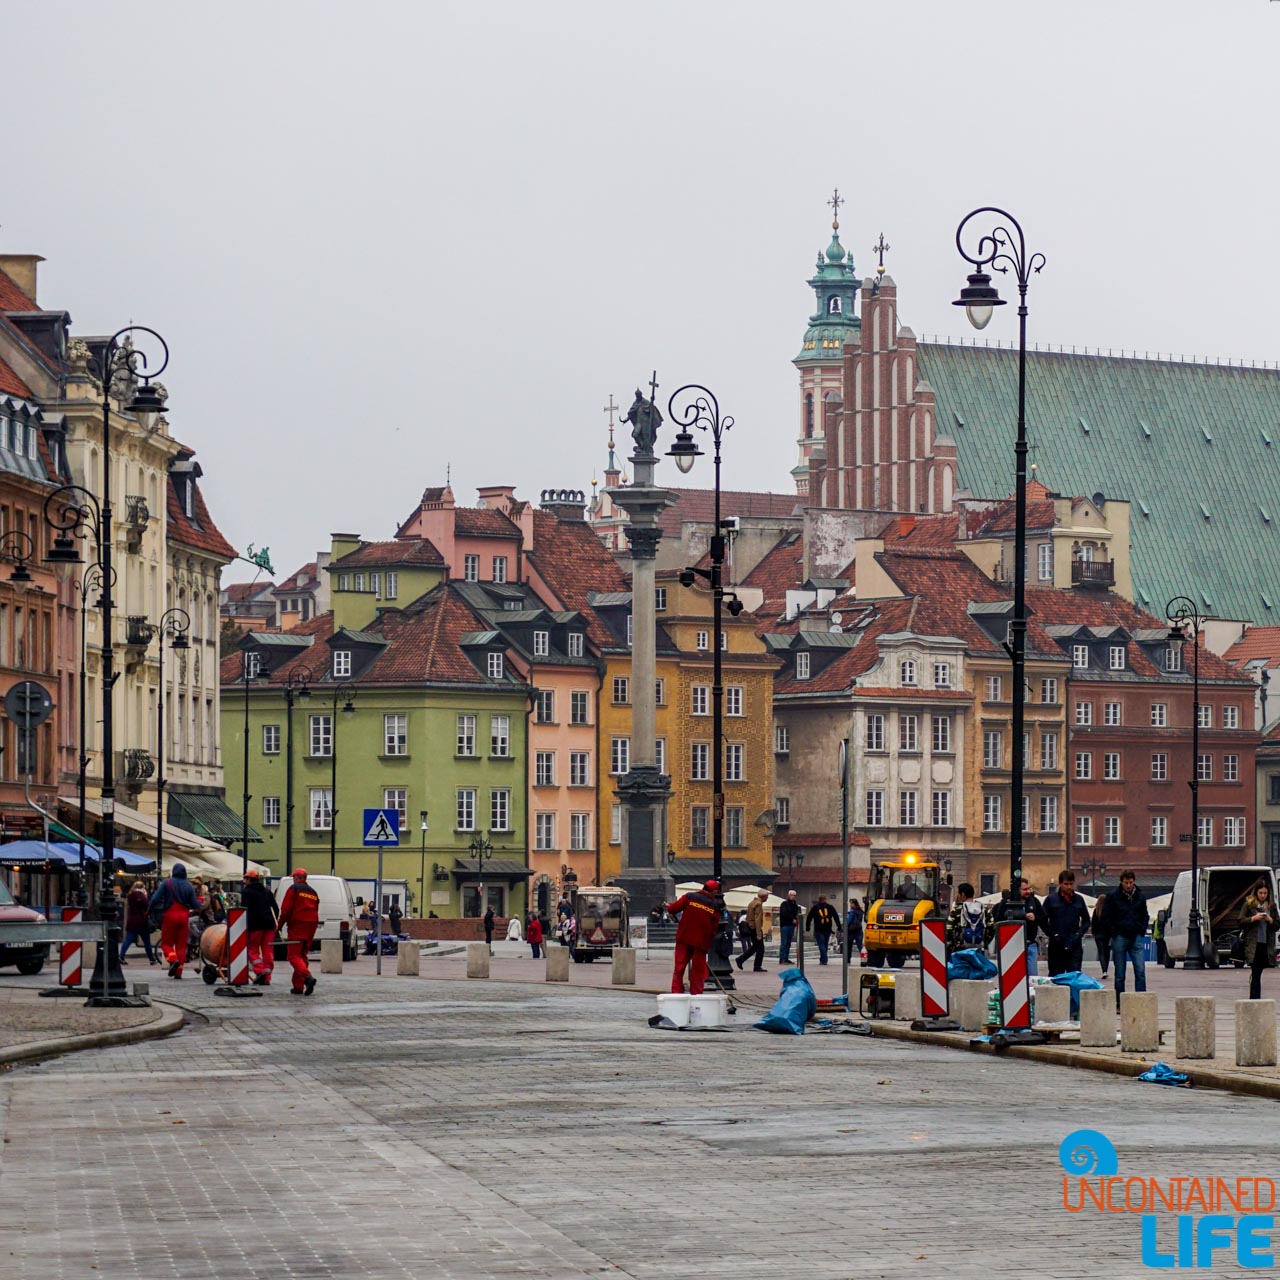 Old City, Things to do in Warsaw, Poland, Uncontained Life